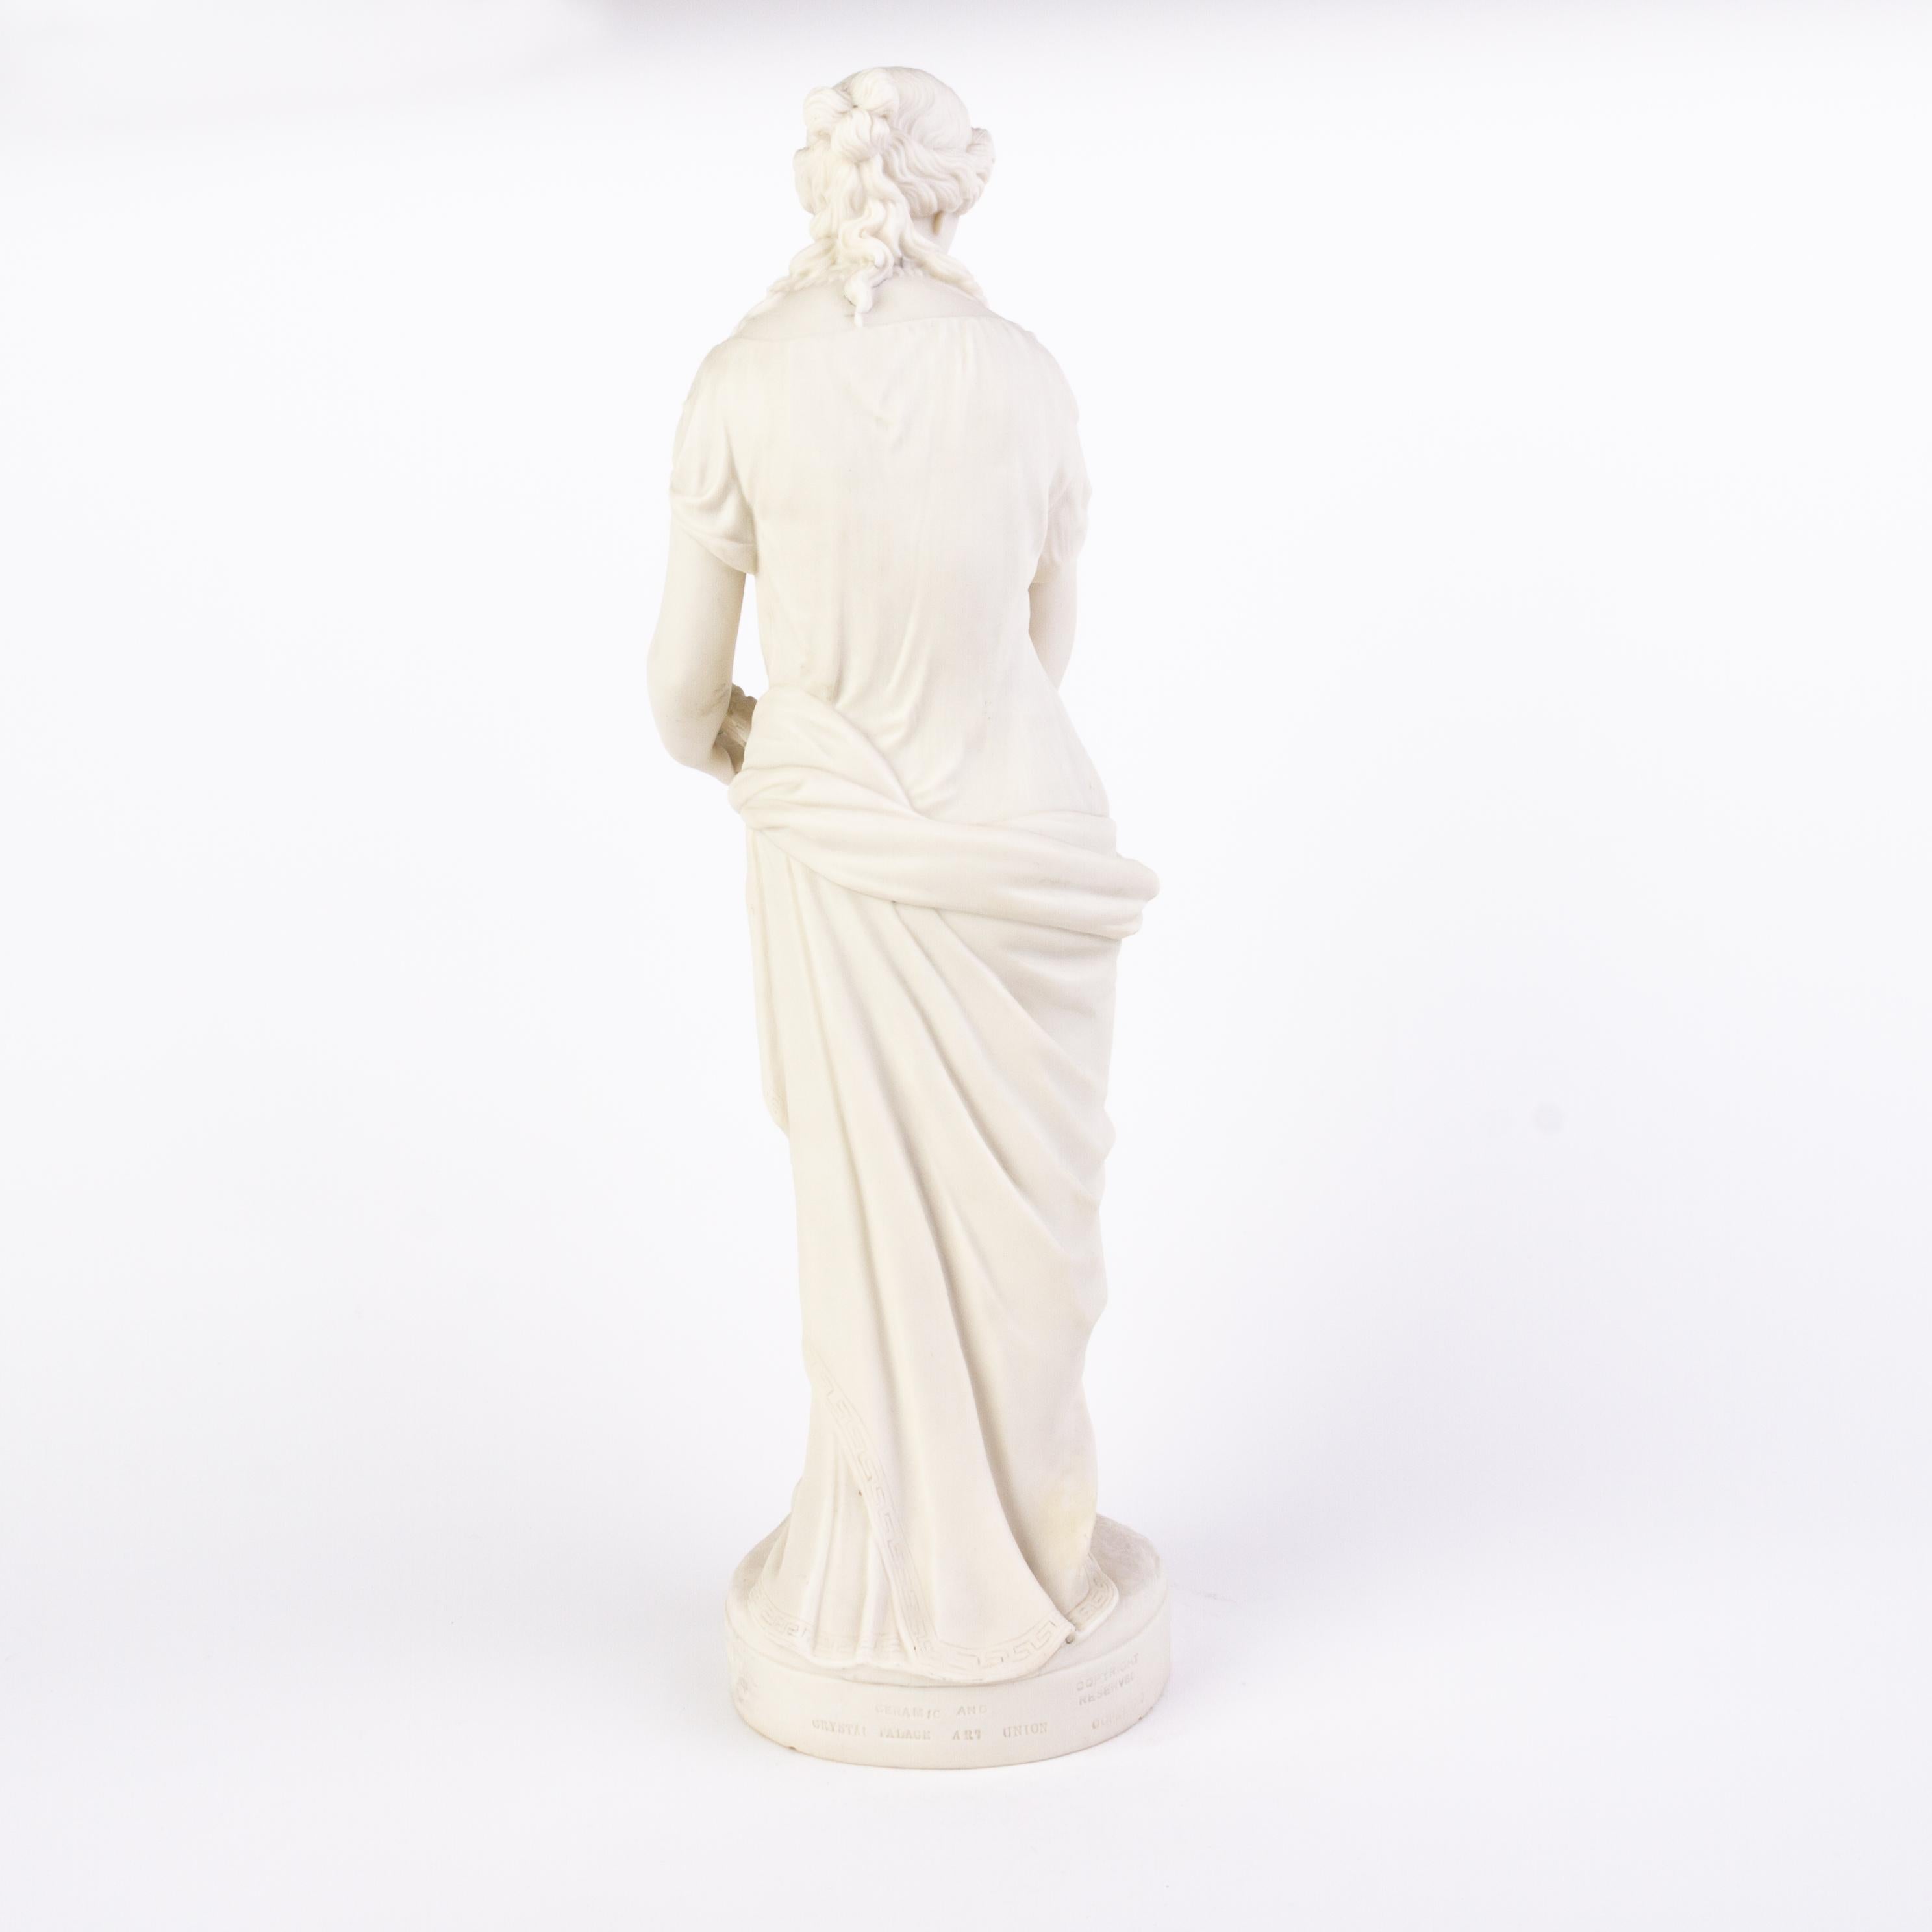 Porcelain English Victorian Copeland Parian Ware Statue of Sappho the Poet 19th Century